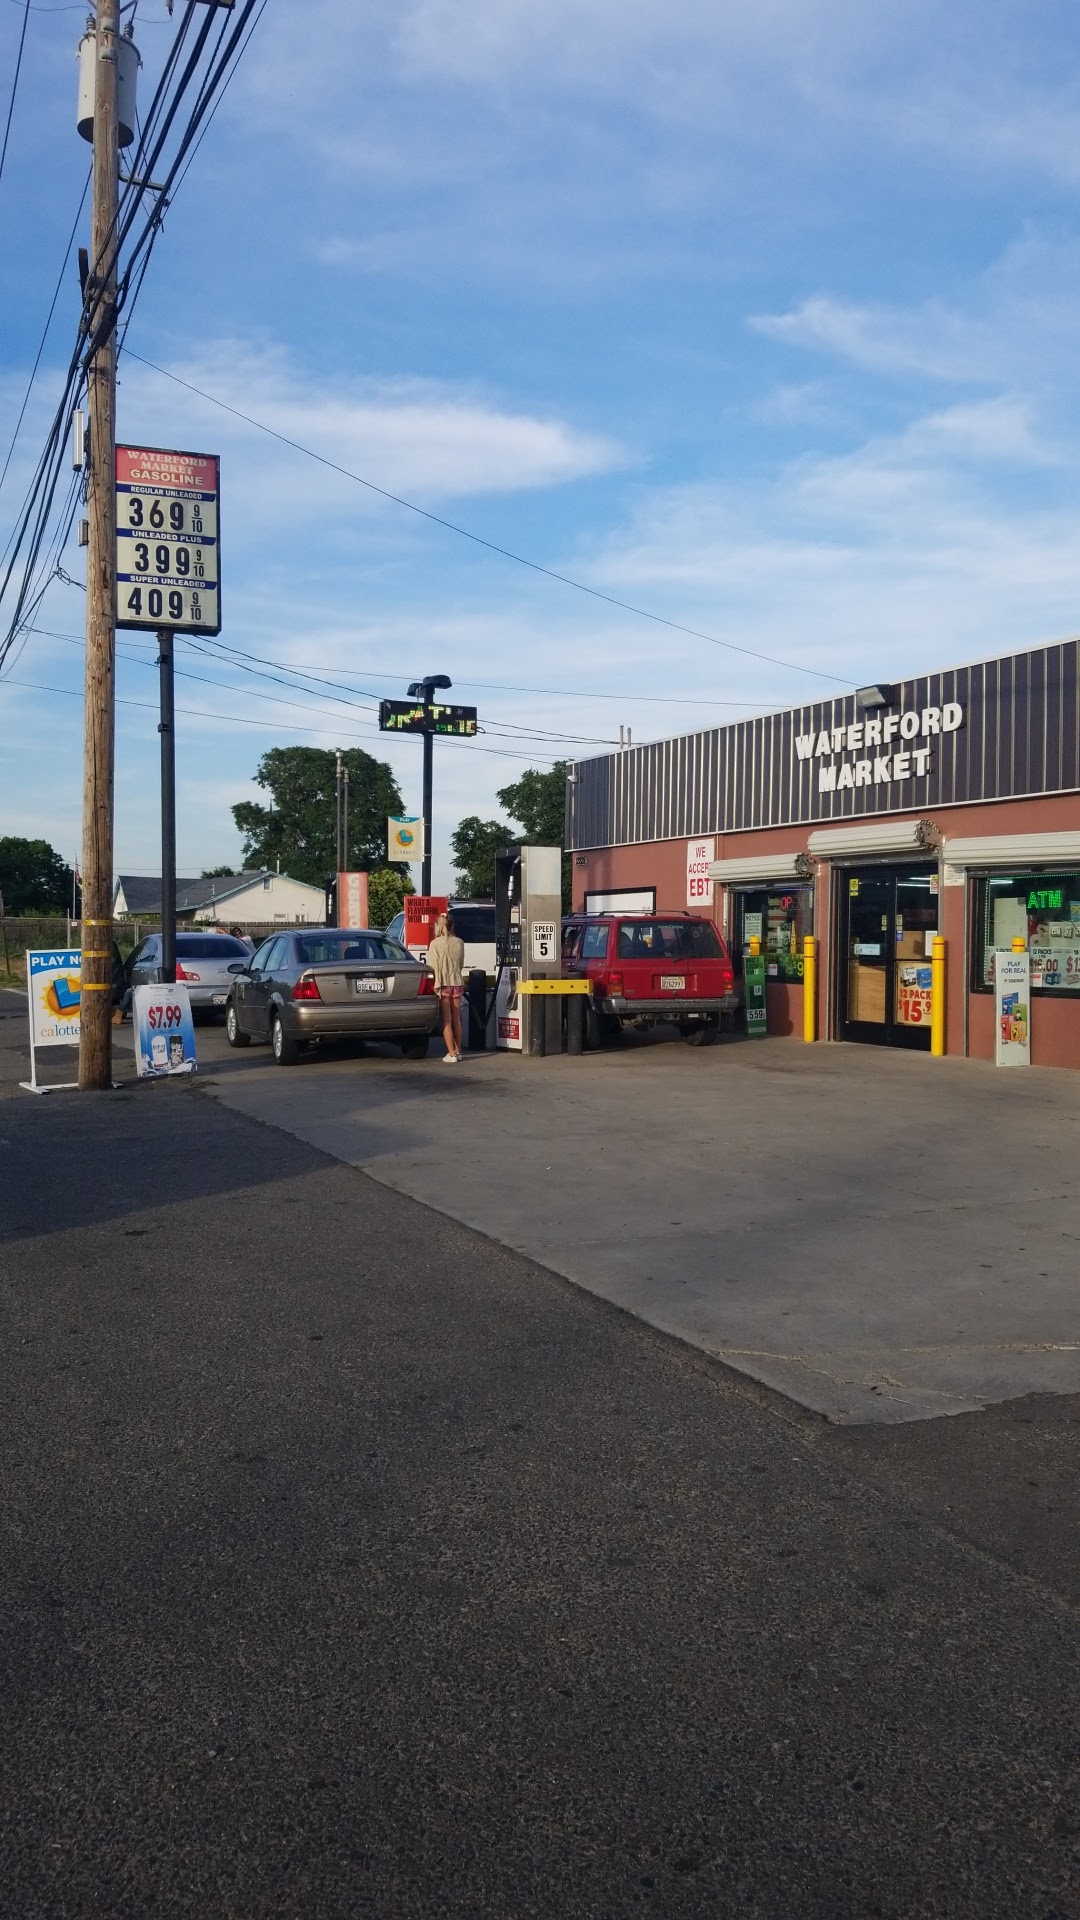 Waterford Market and gasoline